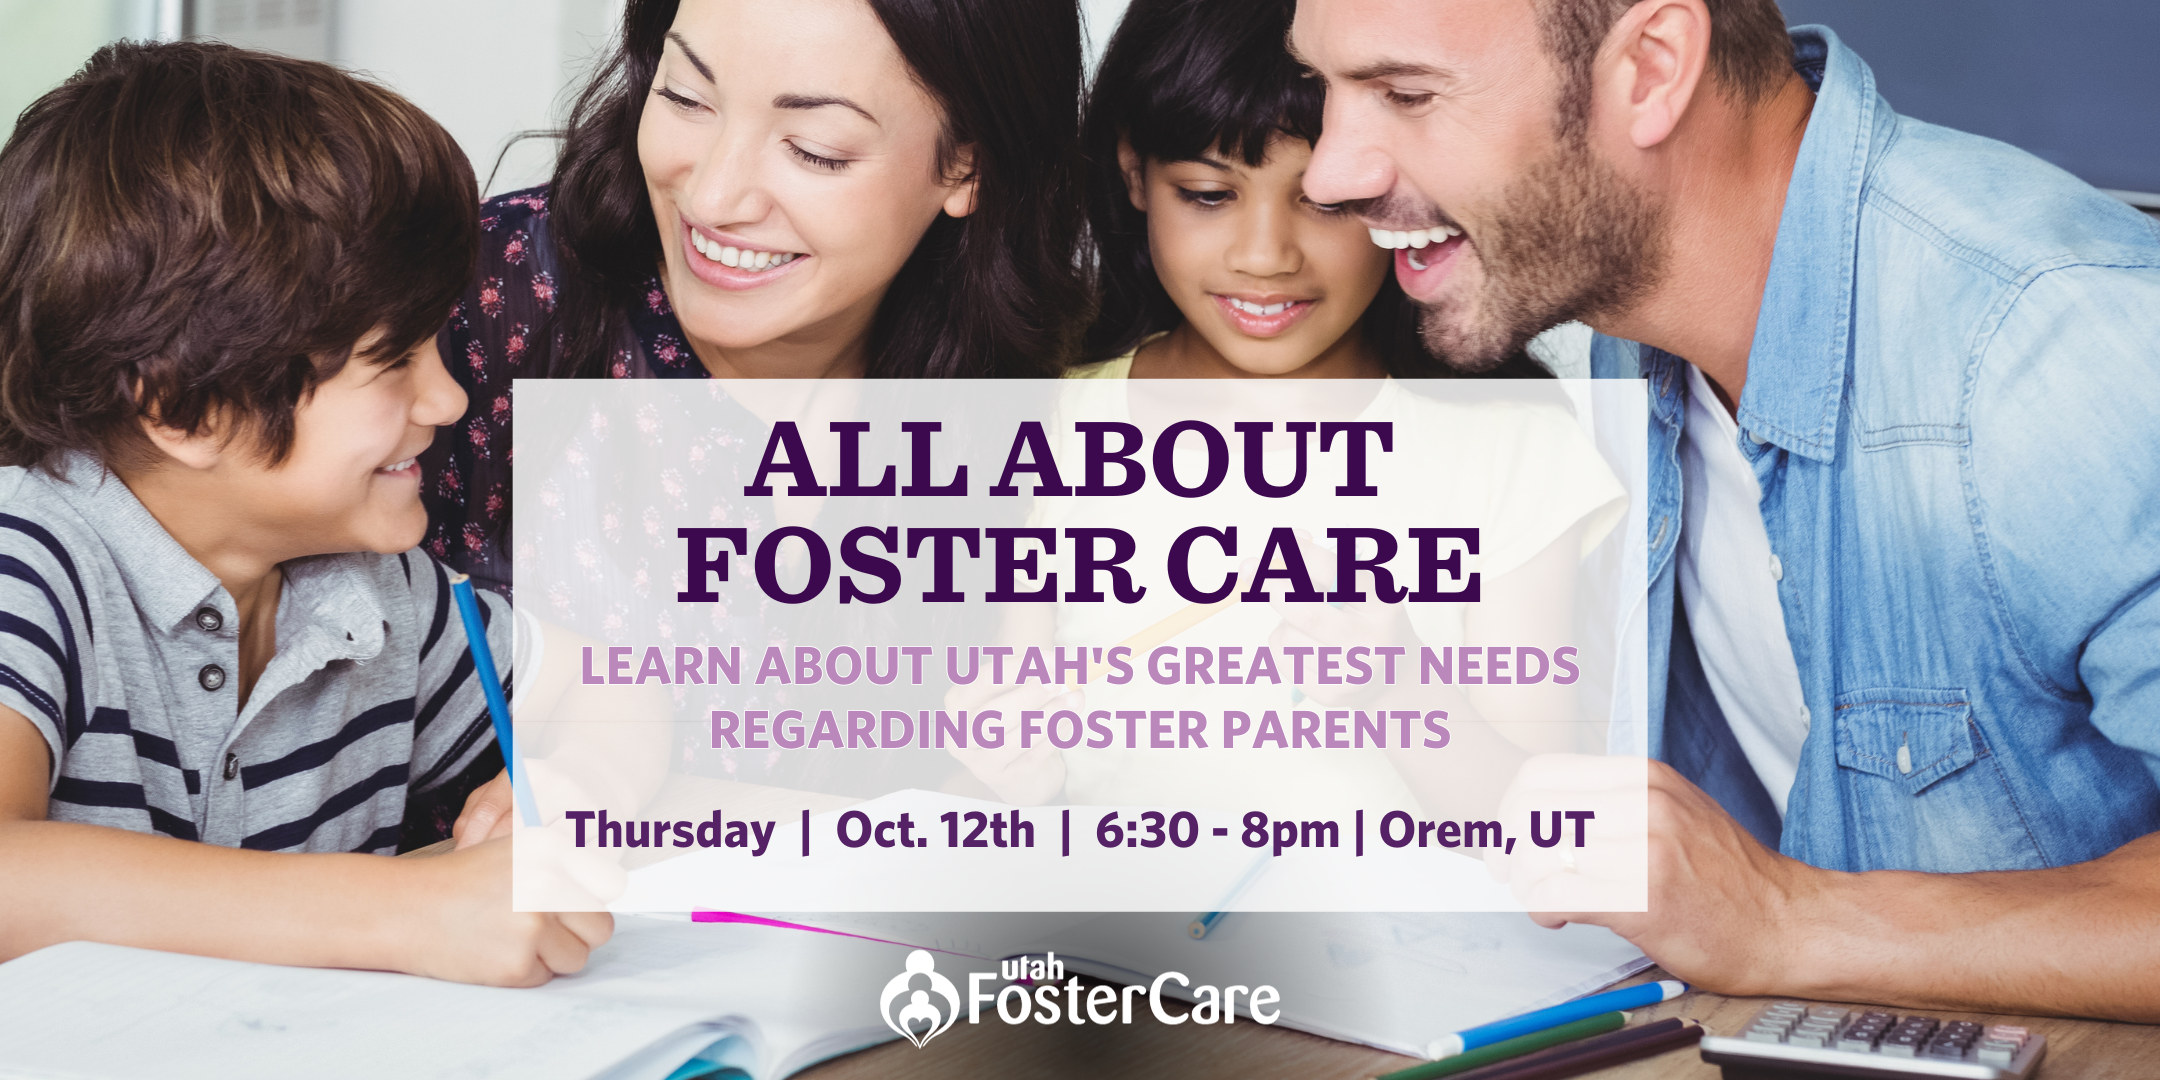 All About Foster Care - Orem and Online